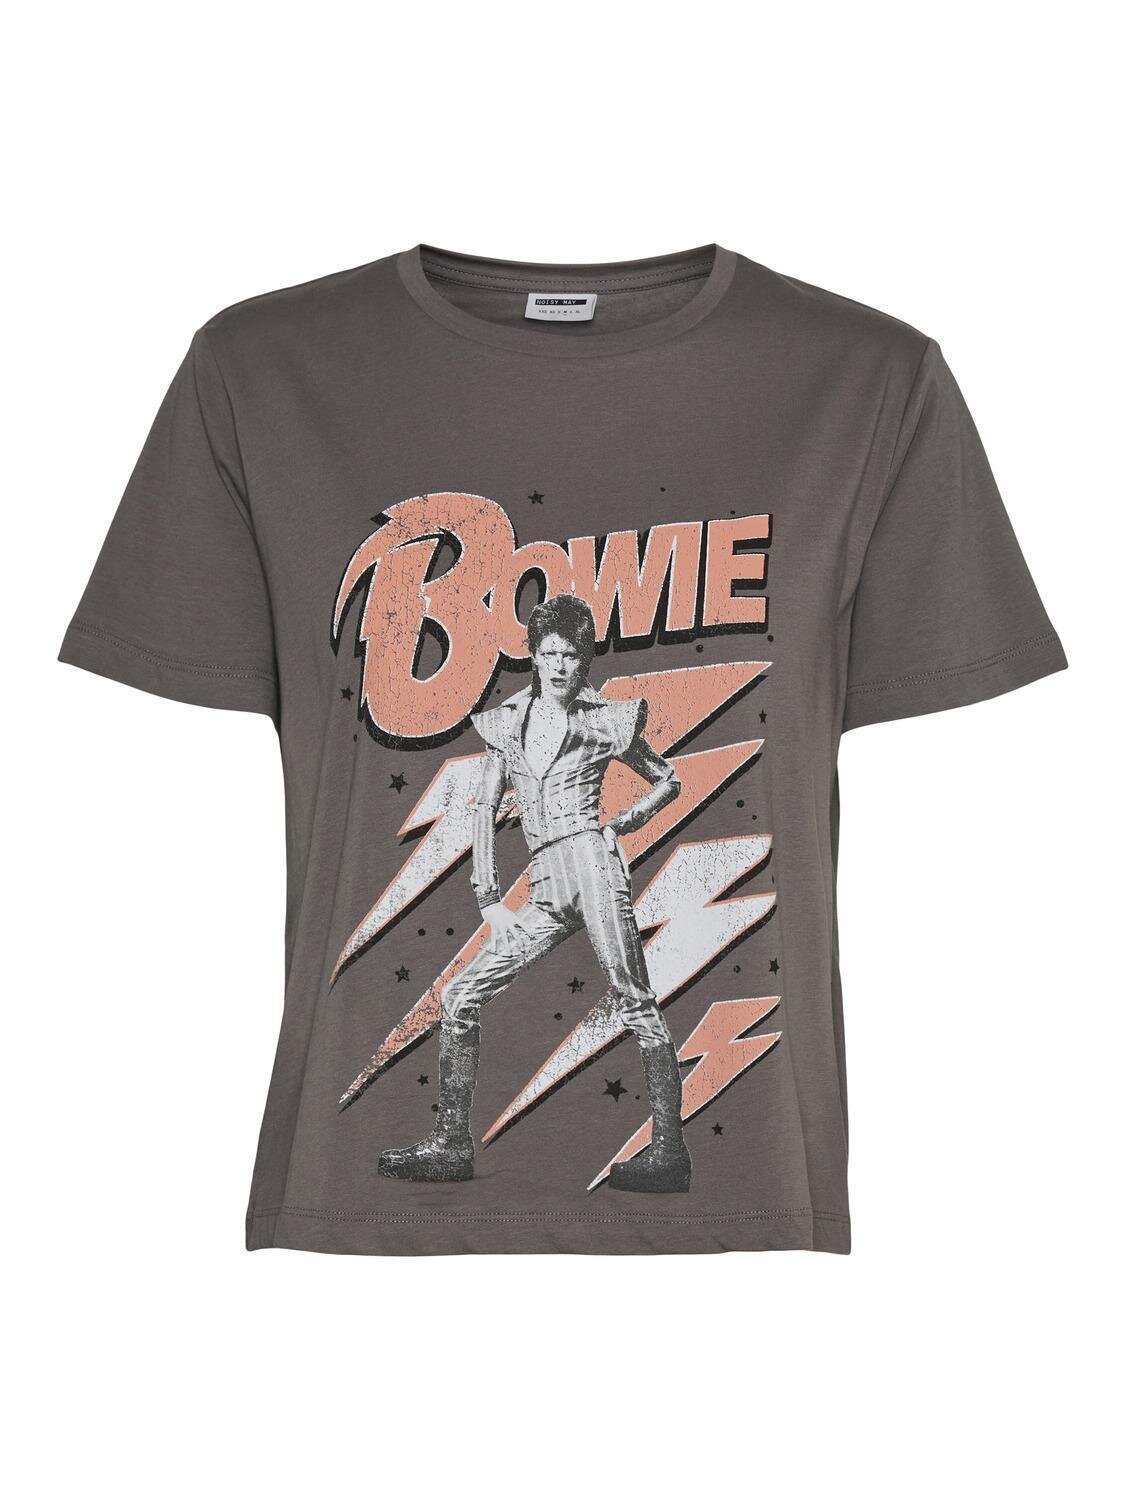 NMALICE S/S BOWIE TOP Granite Grey/BOWIE